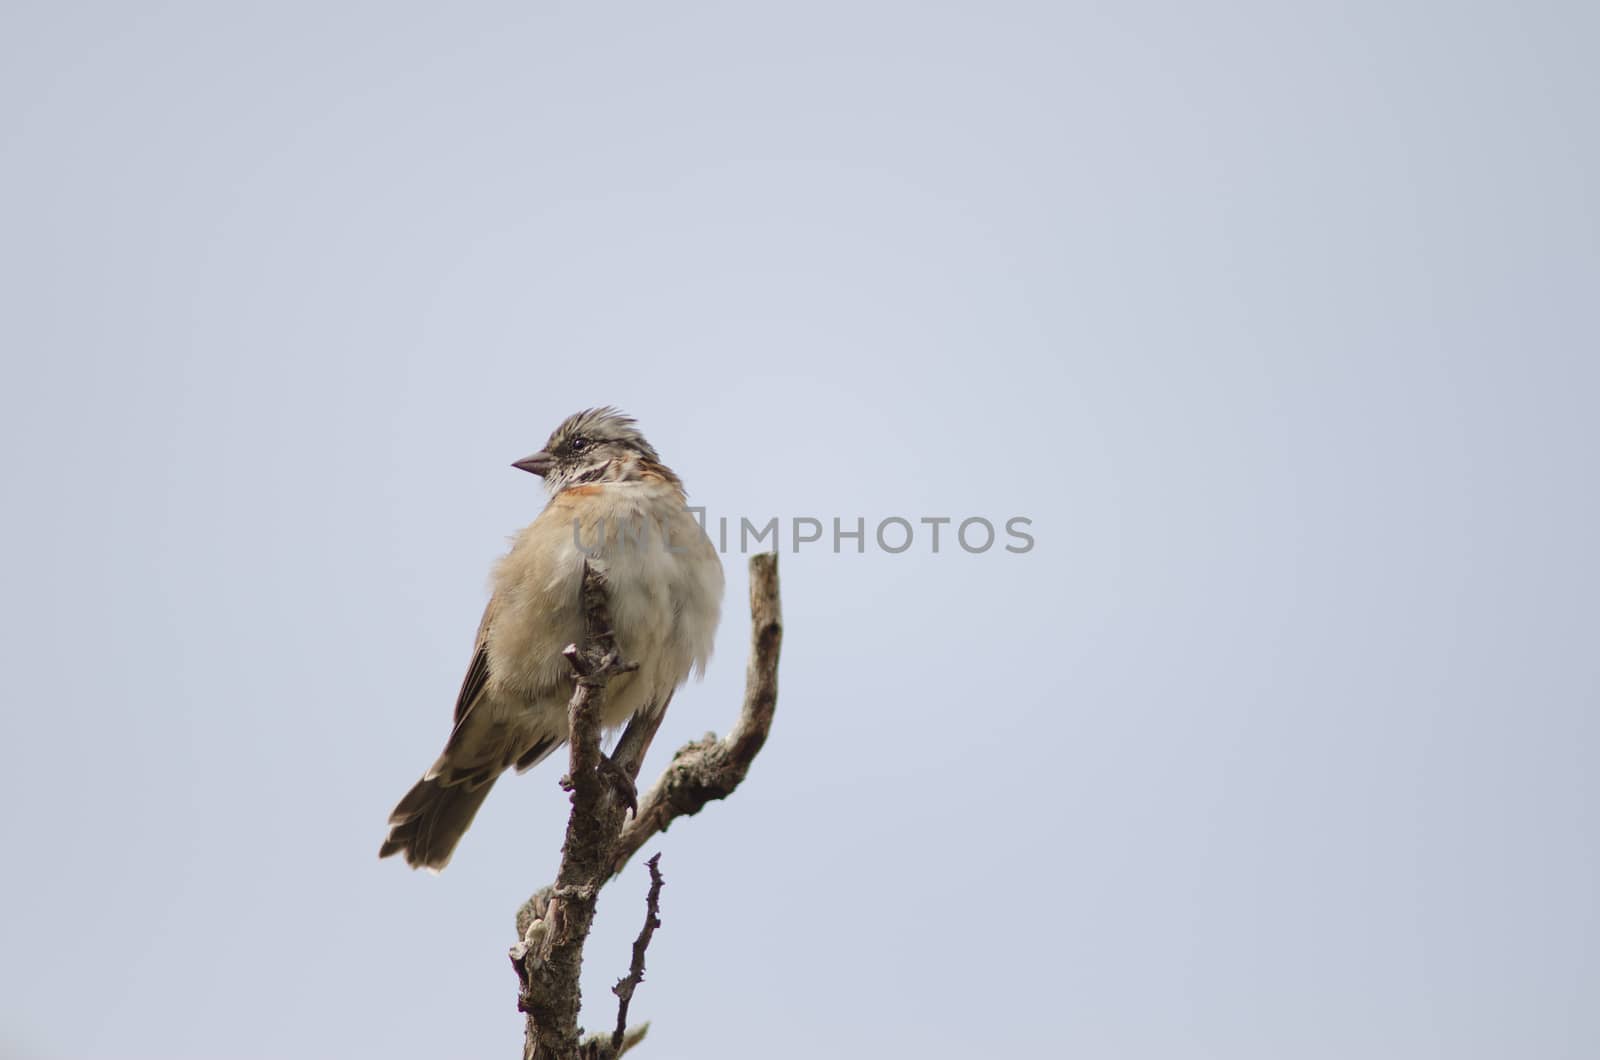 Rufous-collared sparrow perched on a tree branch. by VictorSuarez